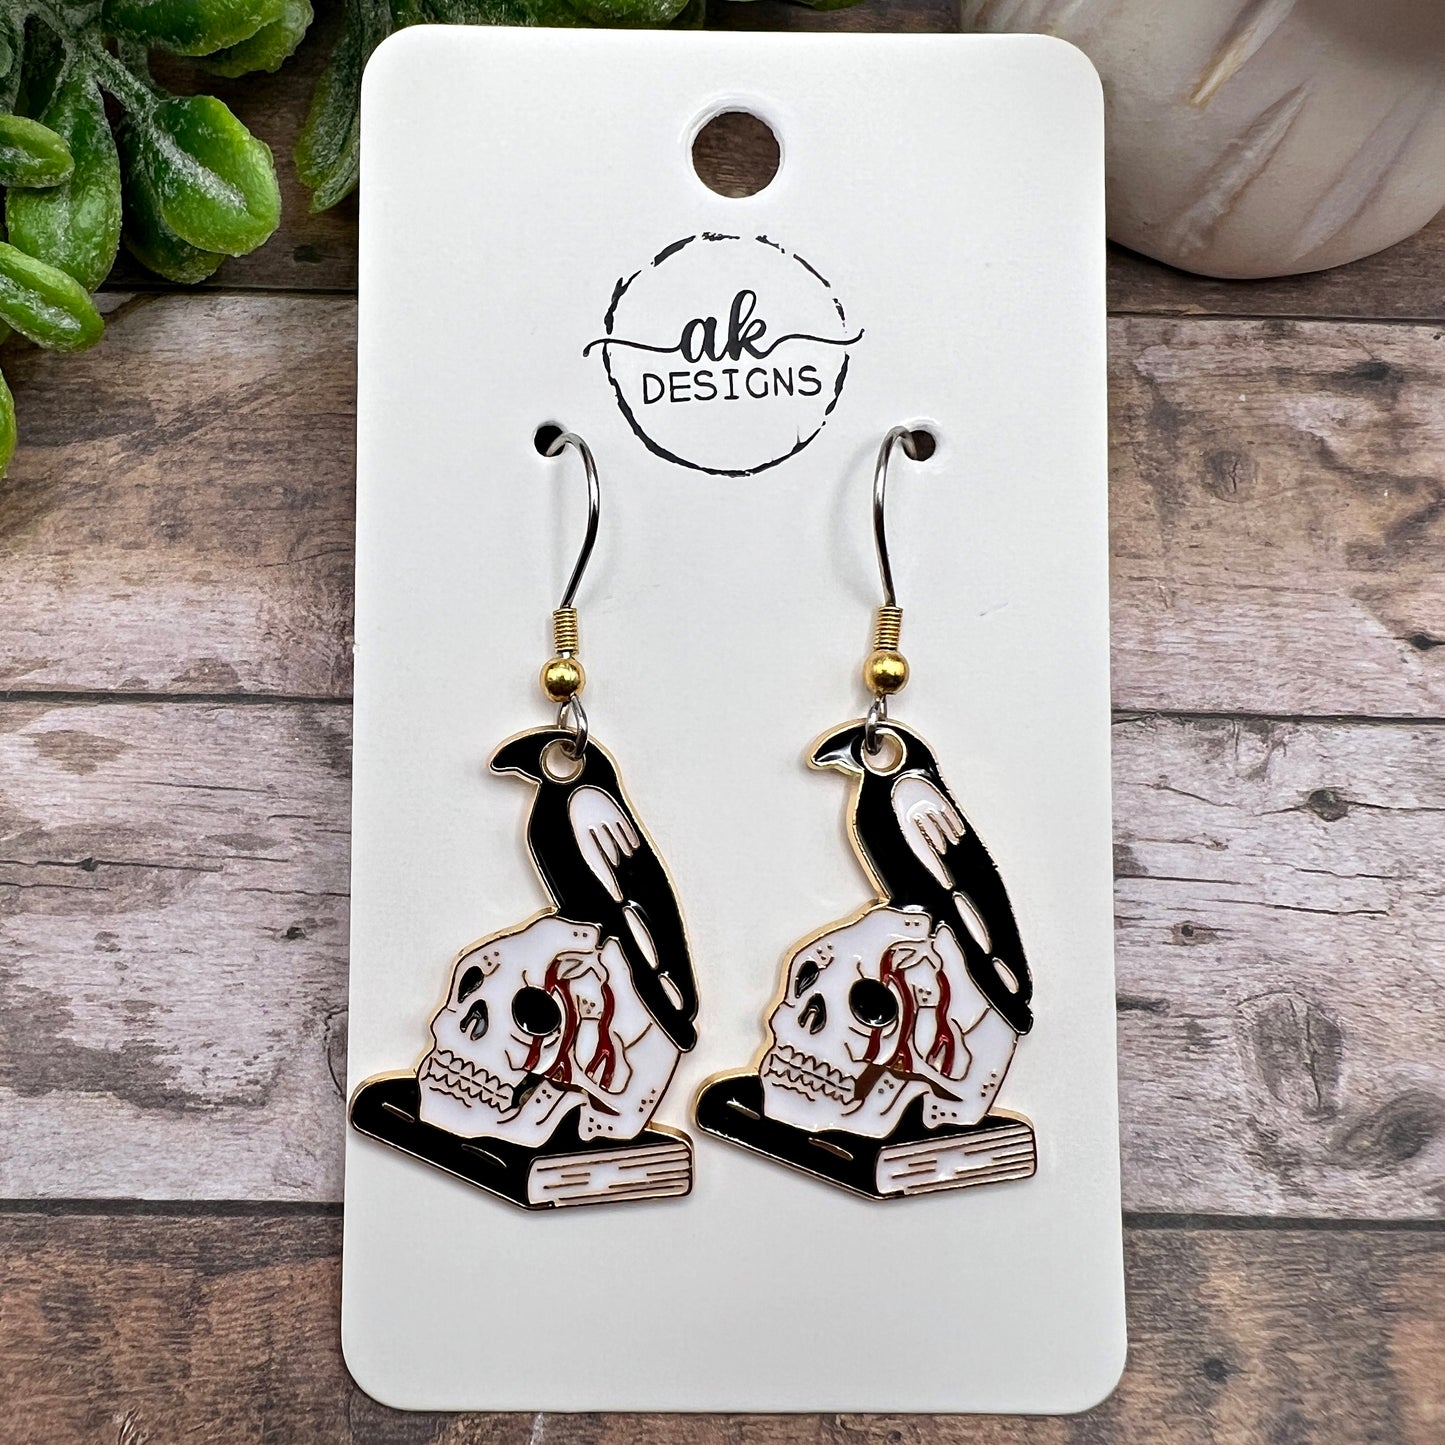 Raven Crow Bloody Skull Halloween, Silver and Gold Two-Toned Stainless Steel  Earrings, Hypoallergenic Gift